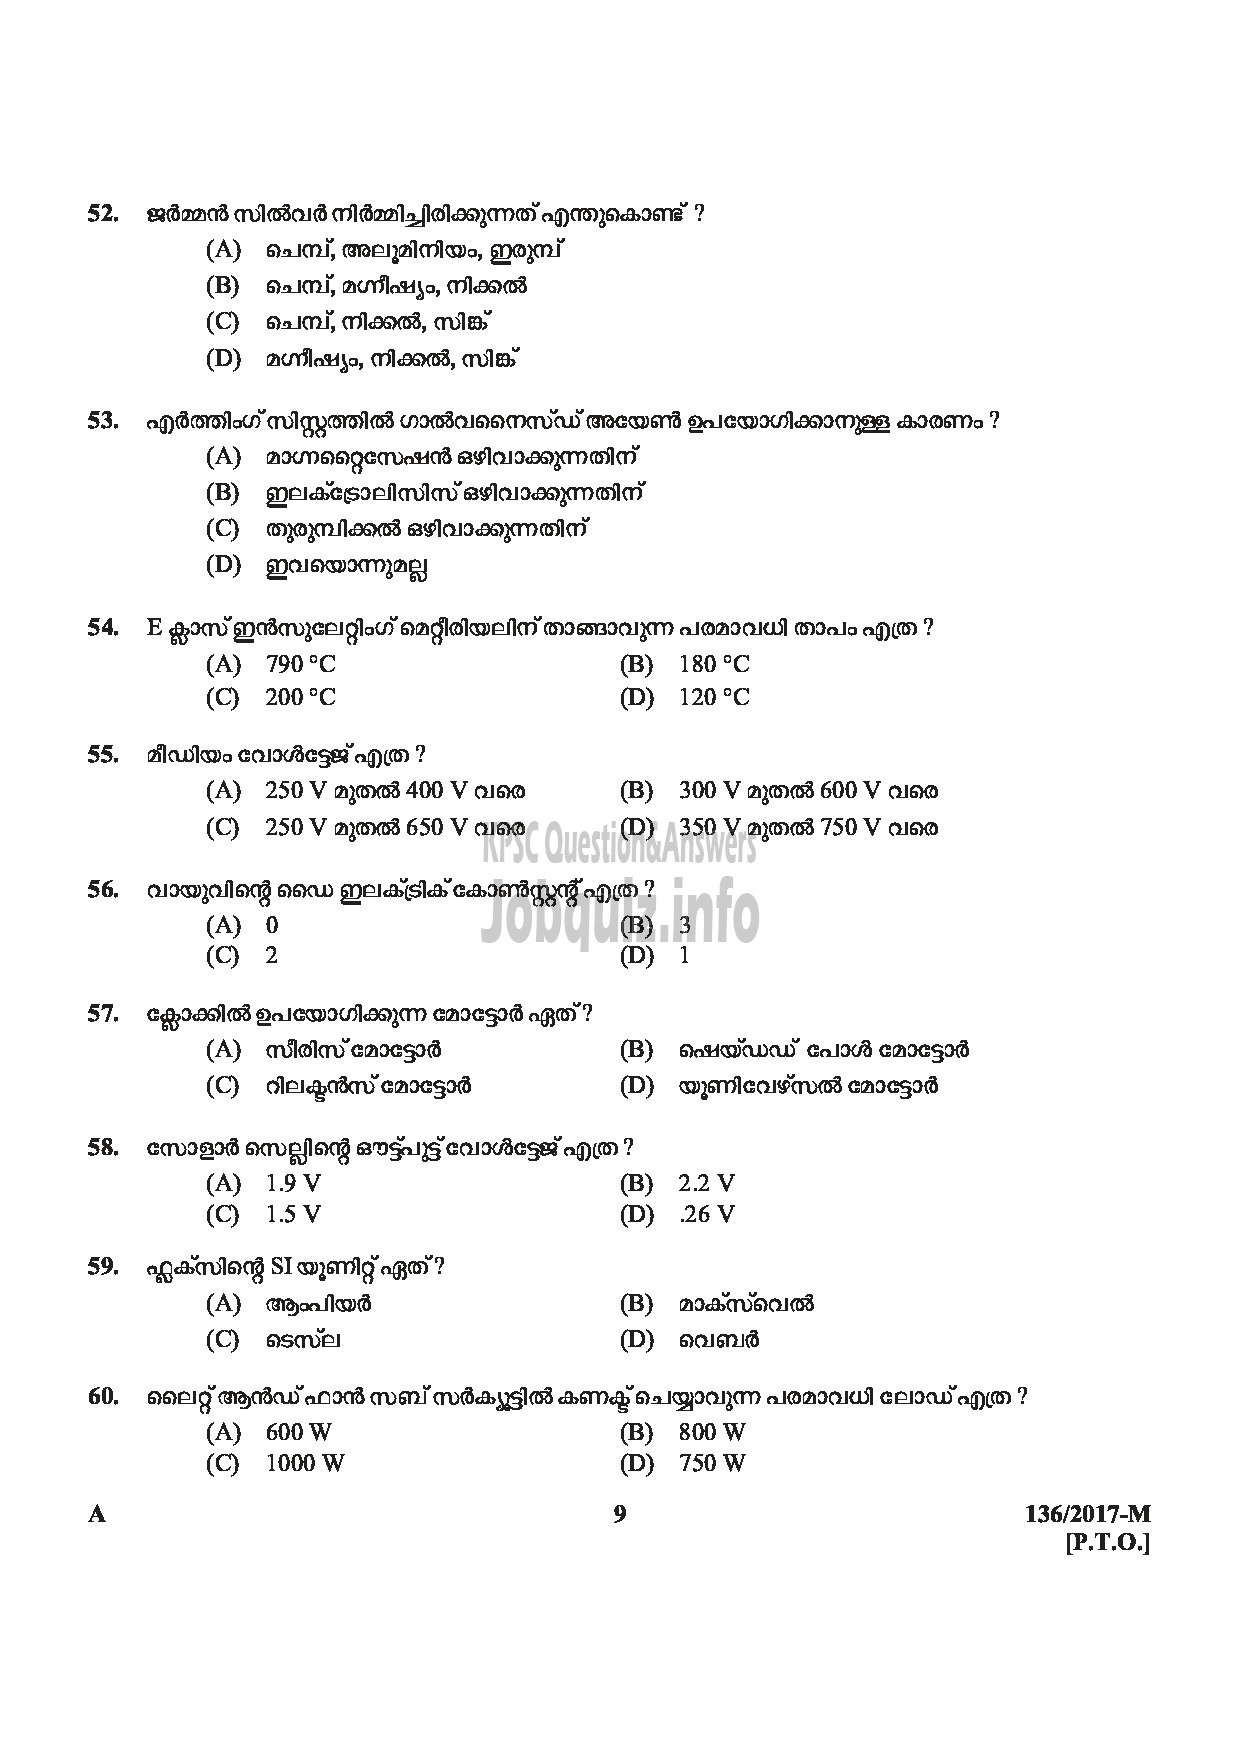 Kerala PSC Question Paper - METER READER/SPOT BILLER SPECIAL RECRUITMENT FROM AMONG ST ONLY MEDIUM OF QUESTION MALAYALAM-9